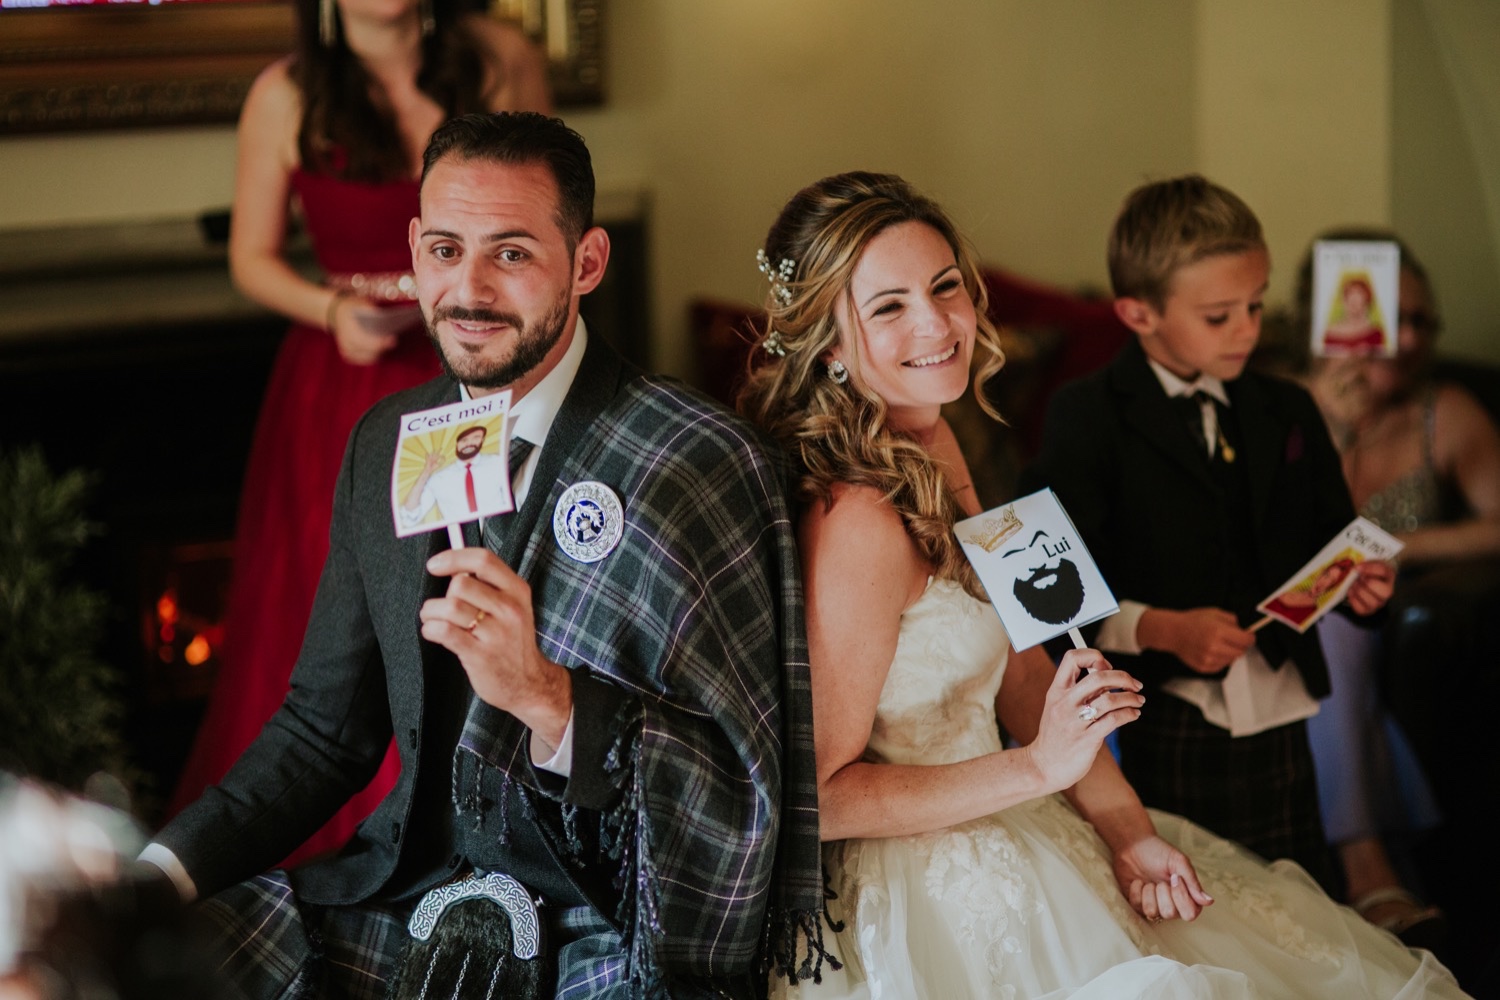 french wedding at carberry tower edinburgh